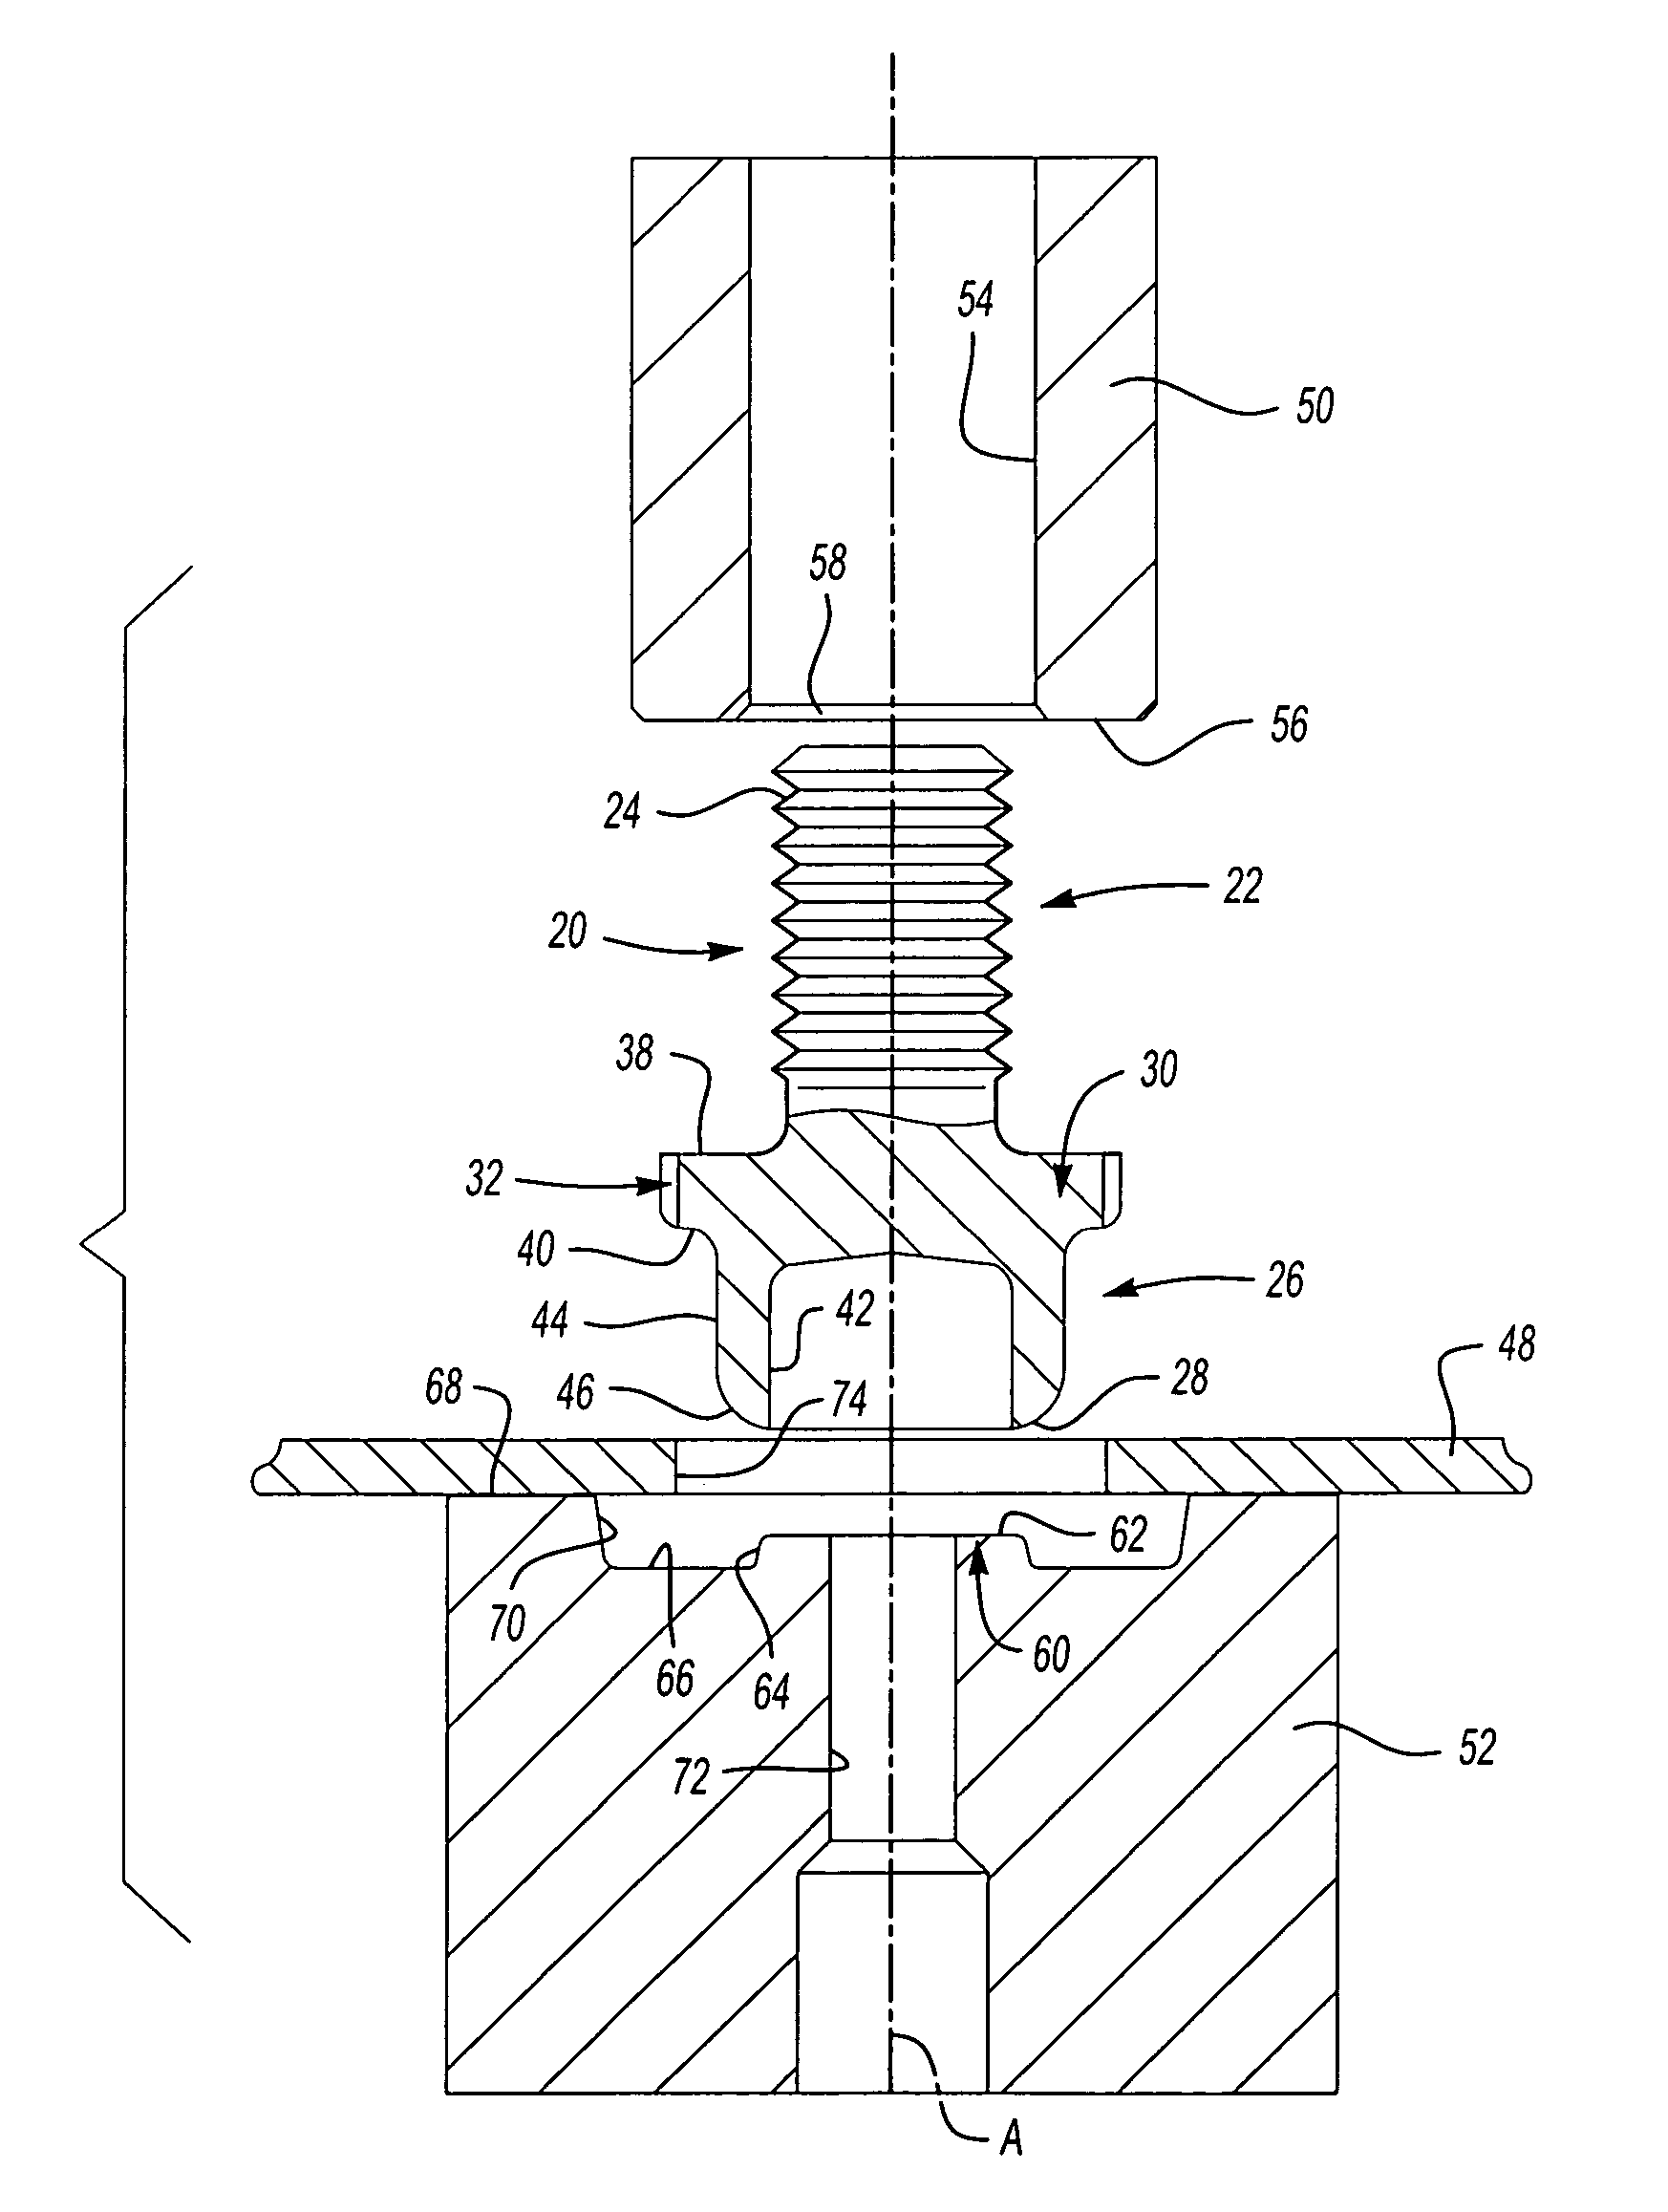 Self-attaching fastener and panel assembly, method of installation and die member